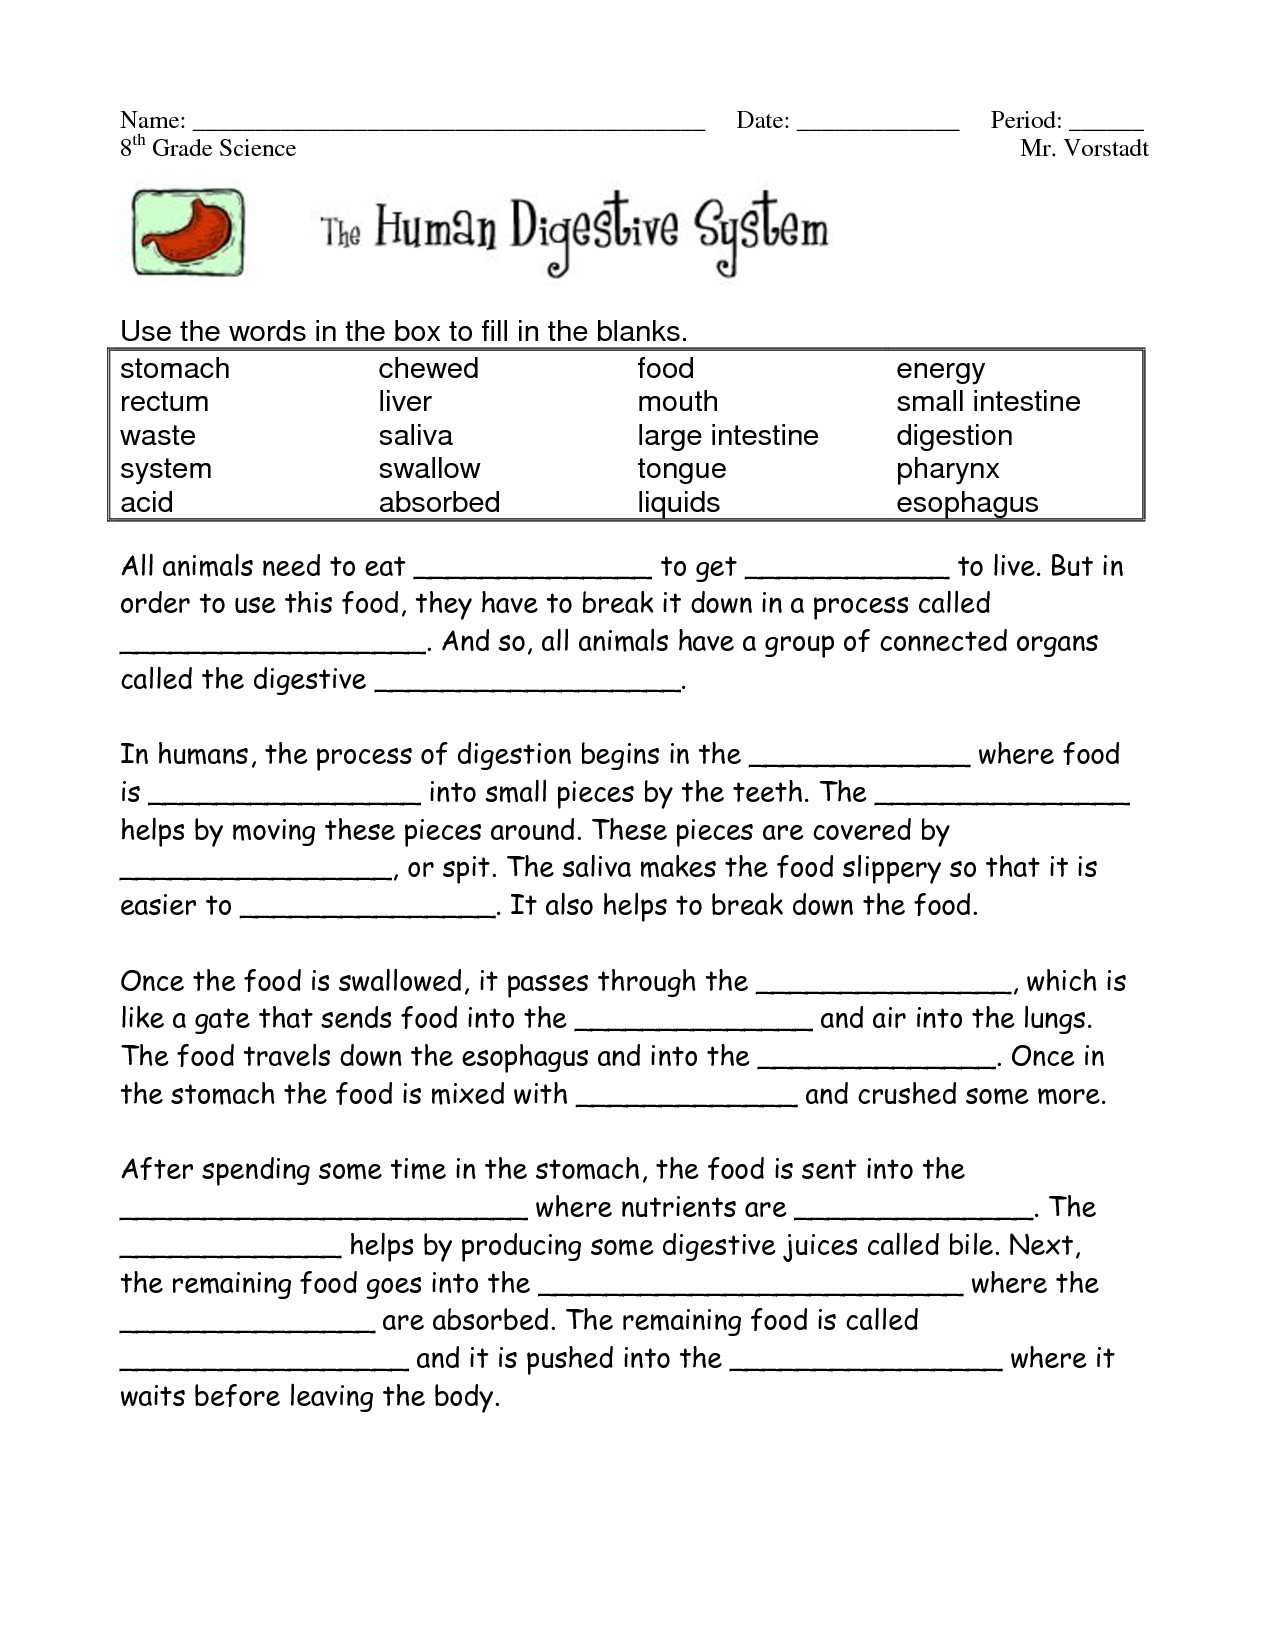 Digestive System Worksheet Answers Also What Am I Science Worksheet Answers Fresh Food Digestion Worksheets